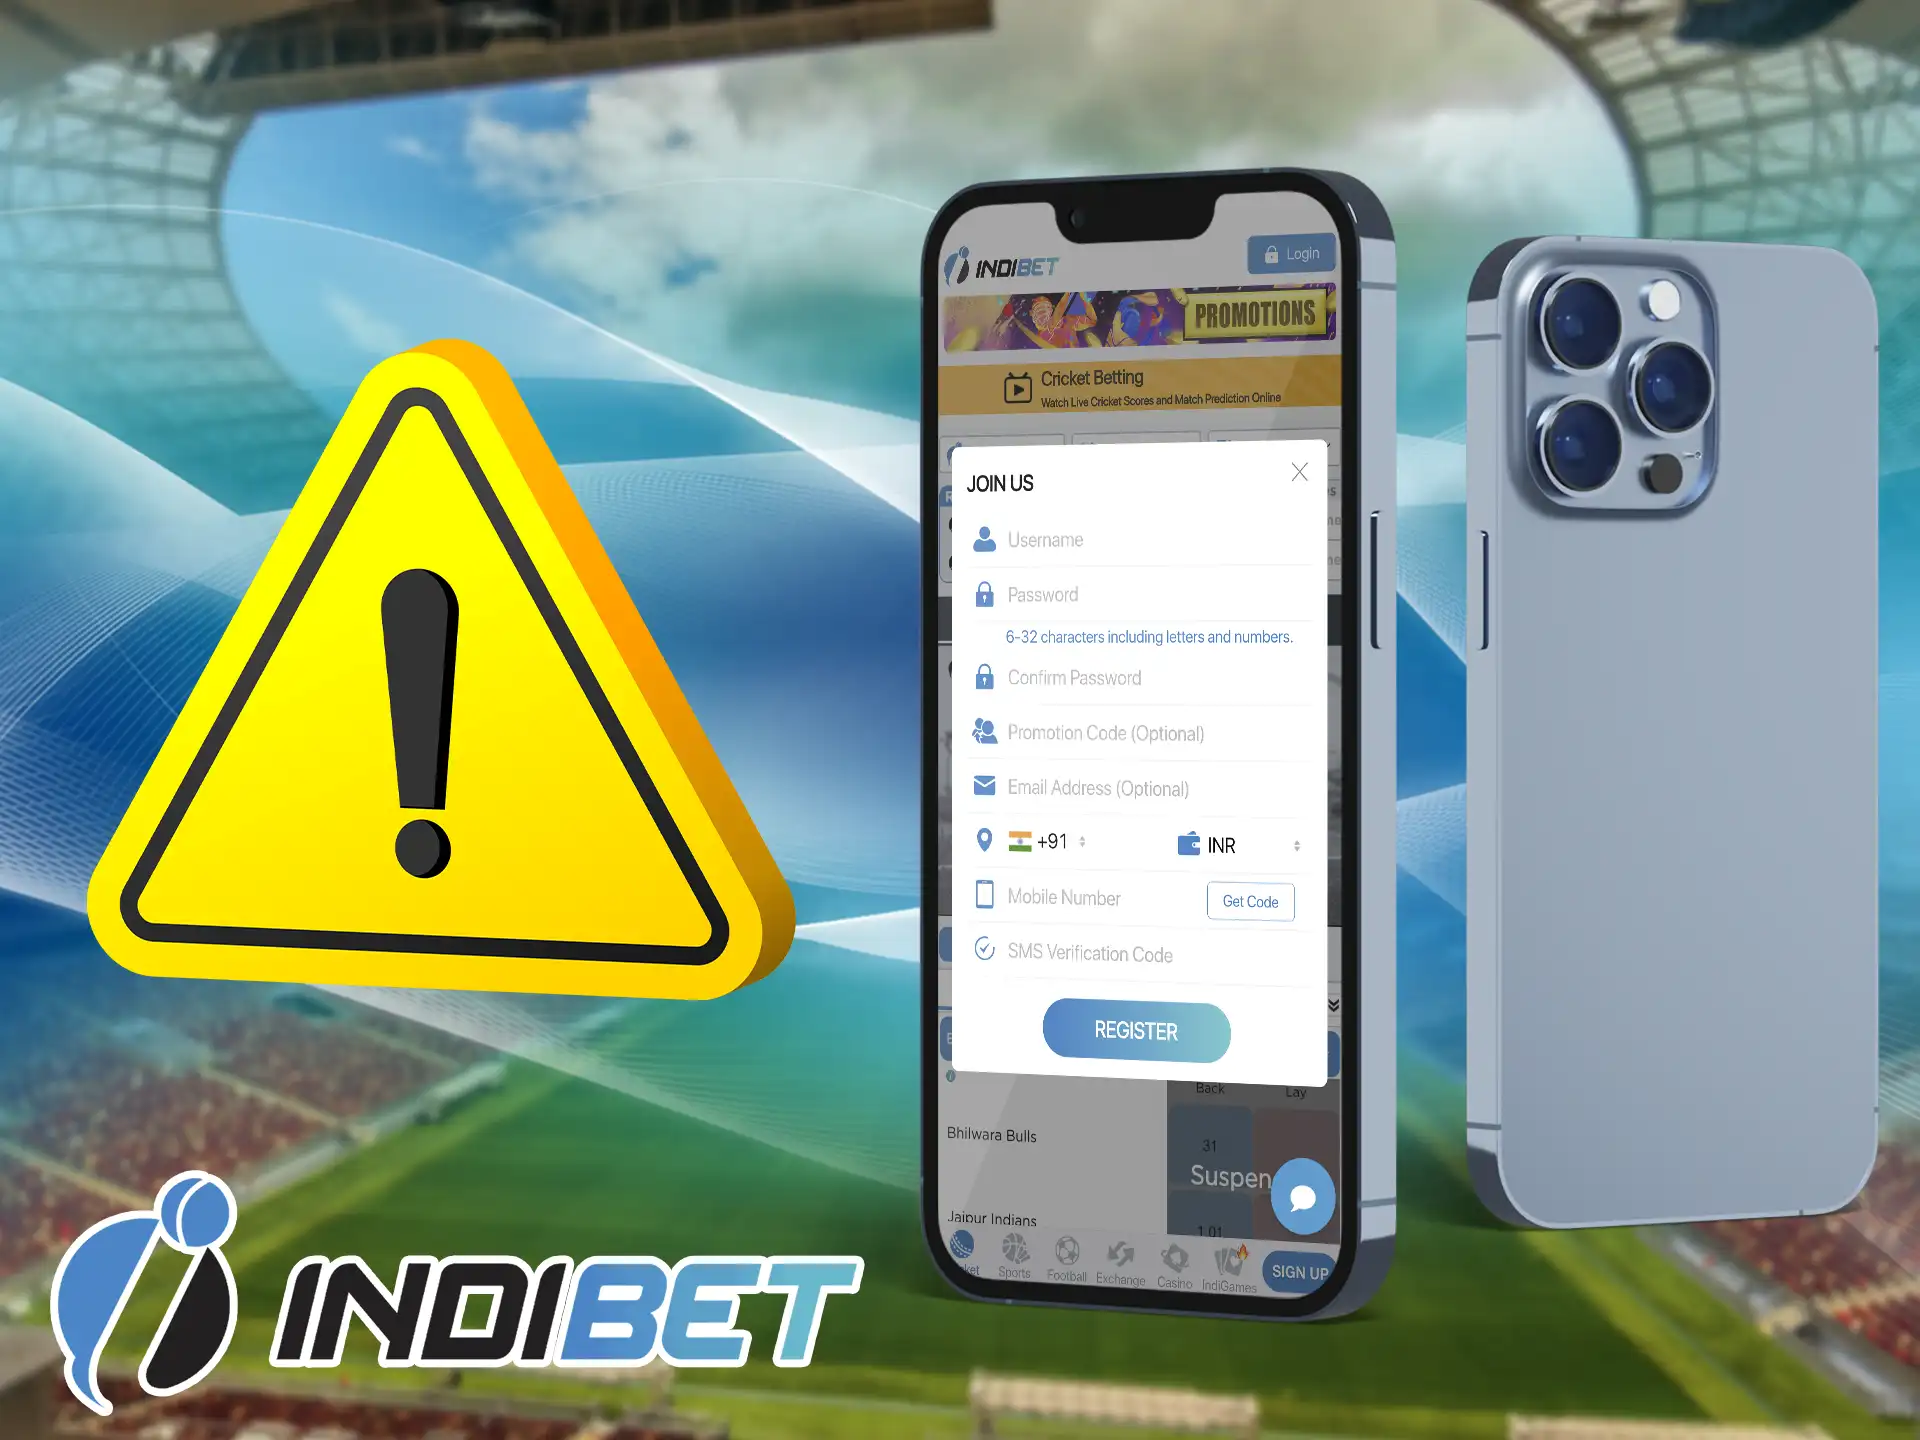 Find out what requirements you need to meet when creating an Indibet account.